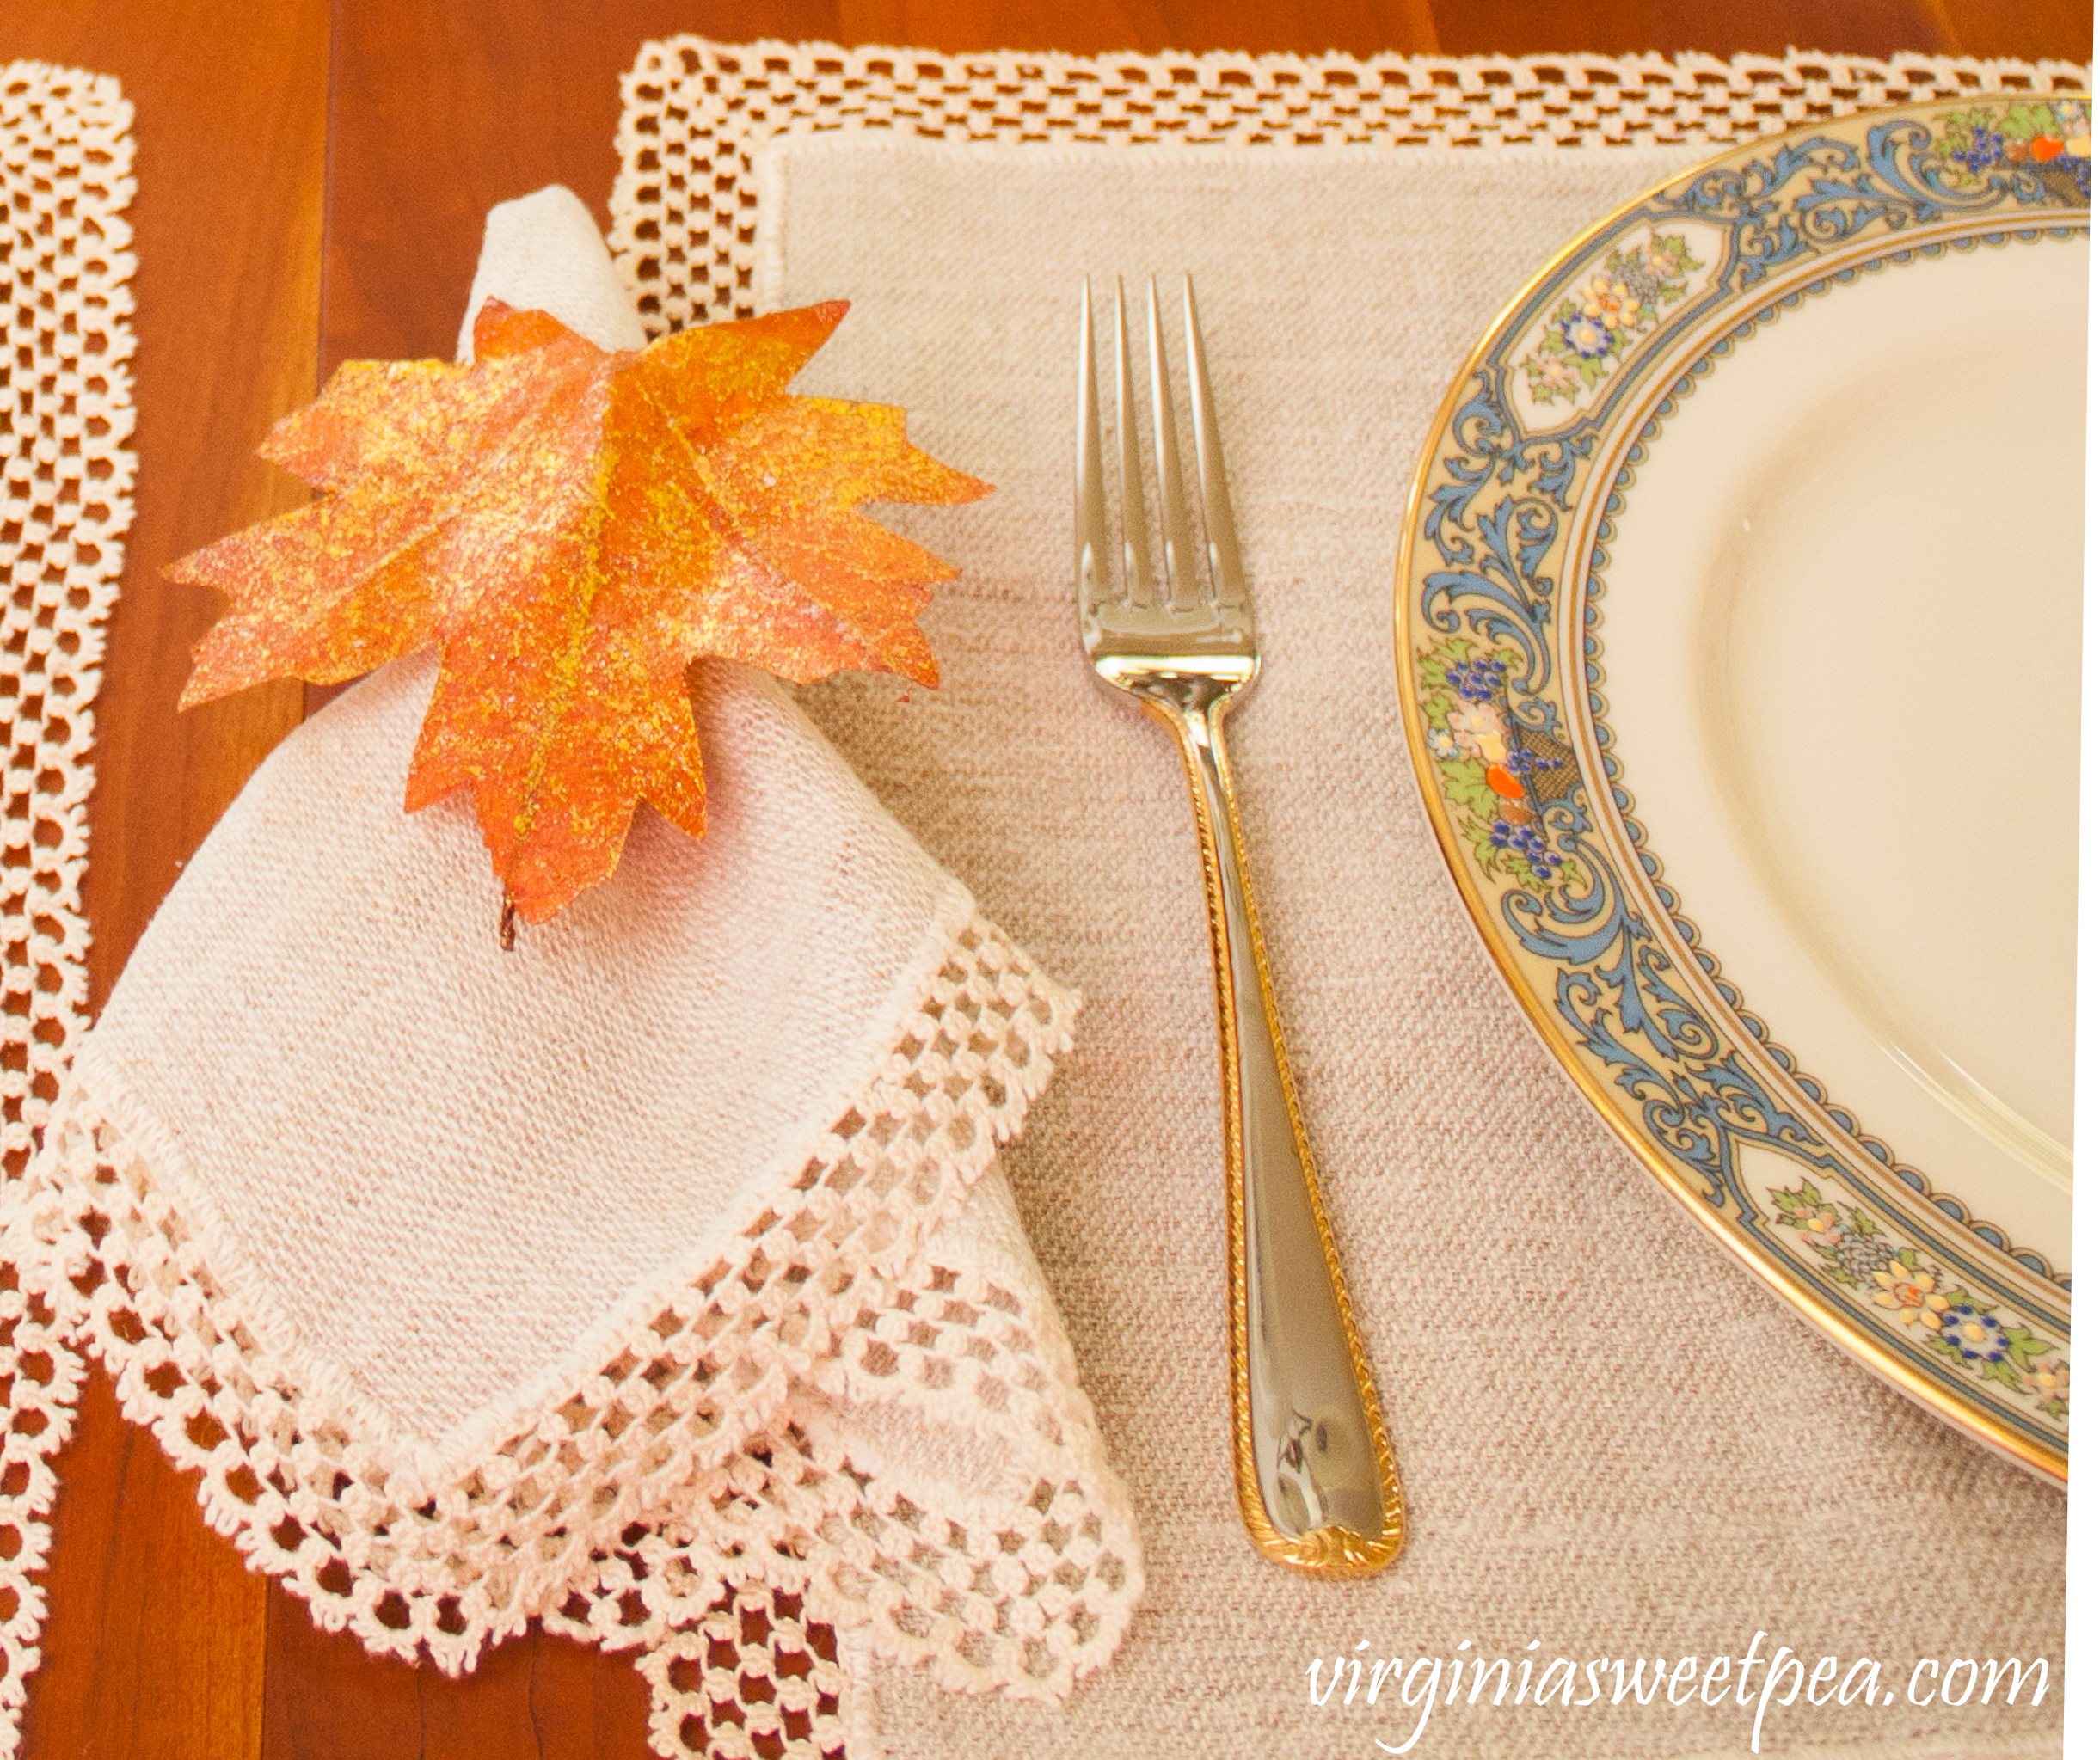 Thanksgiving Table Place Setting with Lenox Autumn dishes and Gorham Golden Ribbon Edge Silverware